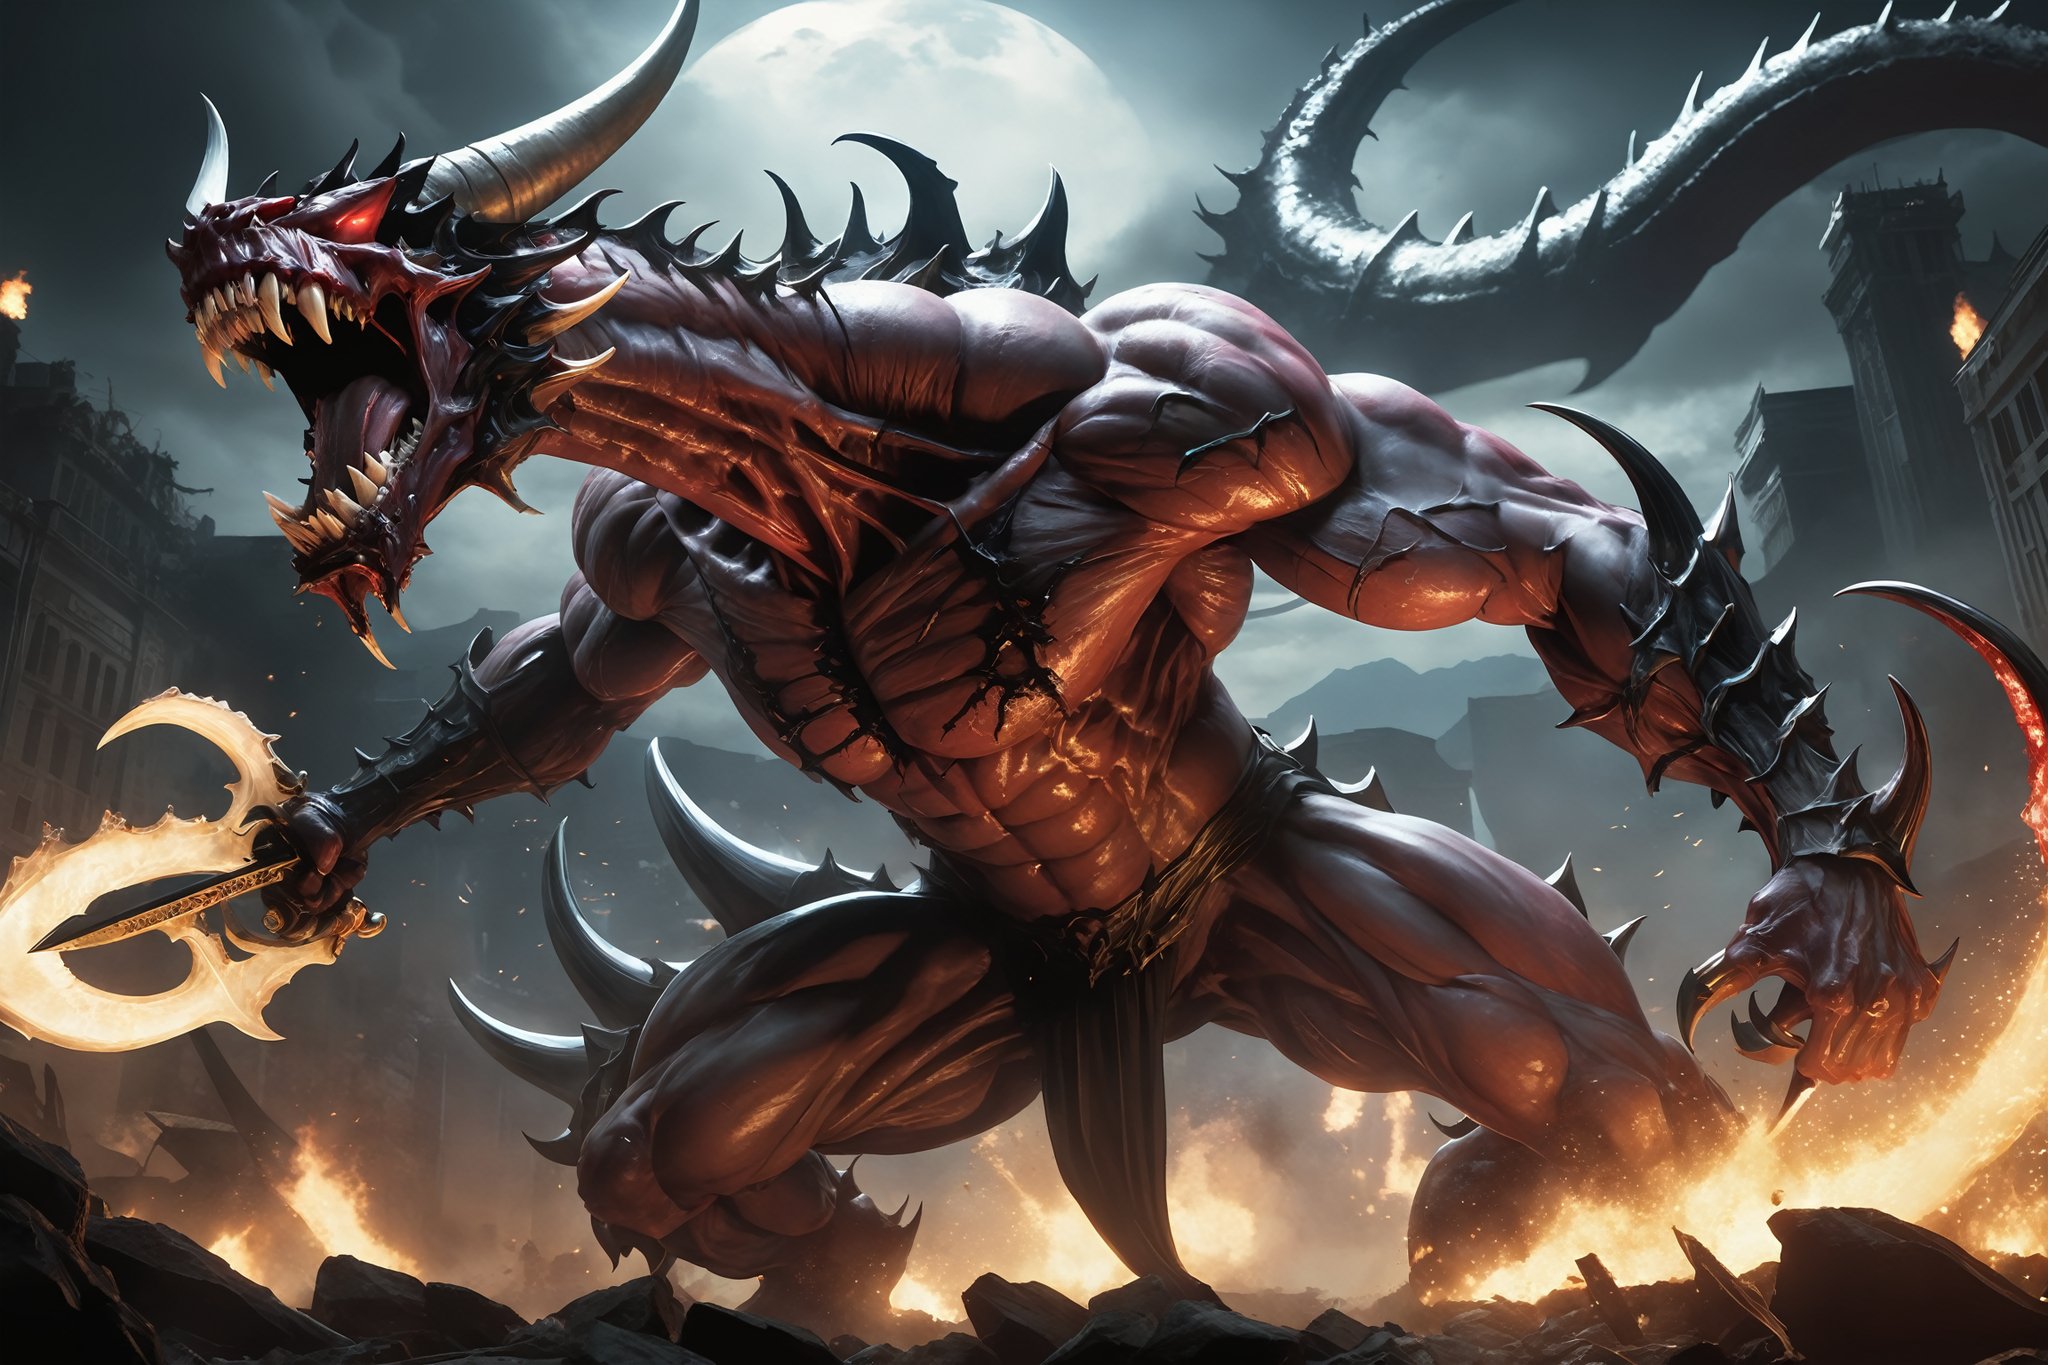 In this breathtaking UHD masterpiece, a fierce 6-demon, scarface creature brandishes a cutlass in a wide-angle shot, showcasing its monstrous maw and ghostly eyes. The demonic figure embodies the spirit of the wild, with vibrant, dynamic pose amidst a battlefield scene. Dramatic lighting casts an eerie glow, highlighting the character's muscular, flesh-mutant form adorned with glistening tumors. A detailed, high-quality design brings this 2D anime-style demon to life in a fighting game-inspired scene, exuding top-notch quality and ultra-high resolution.